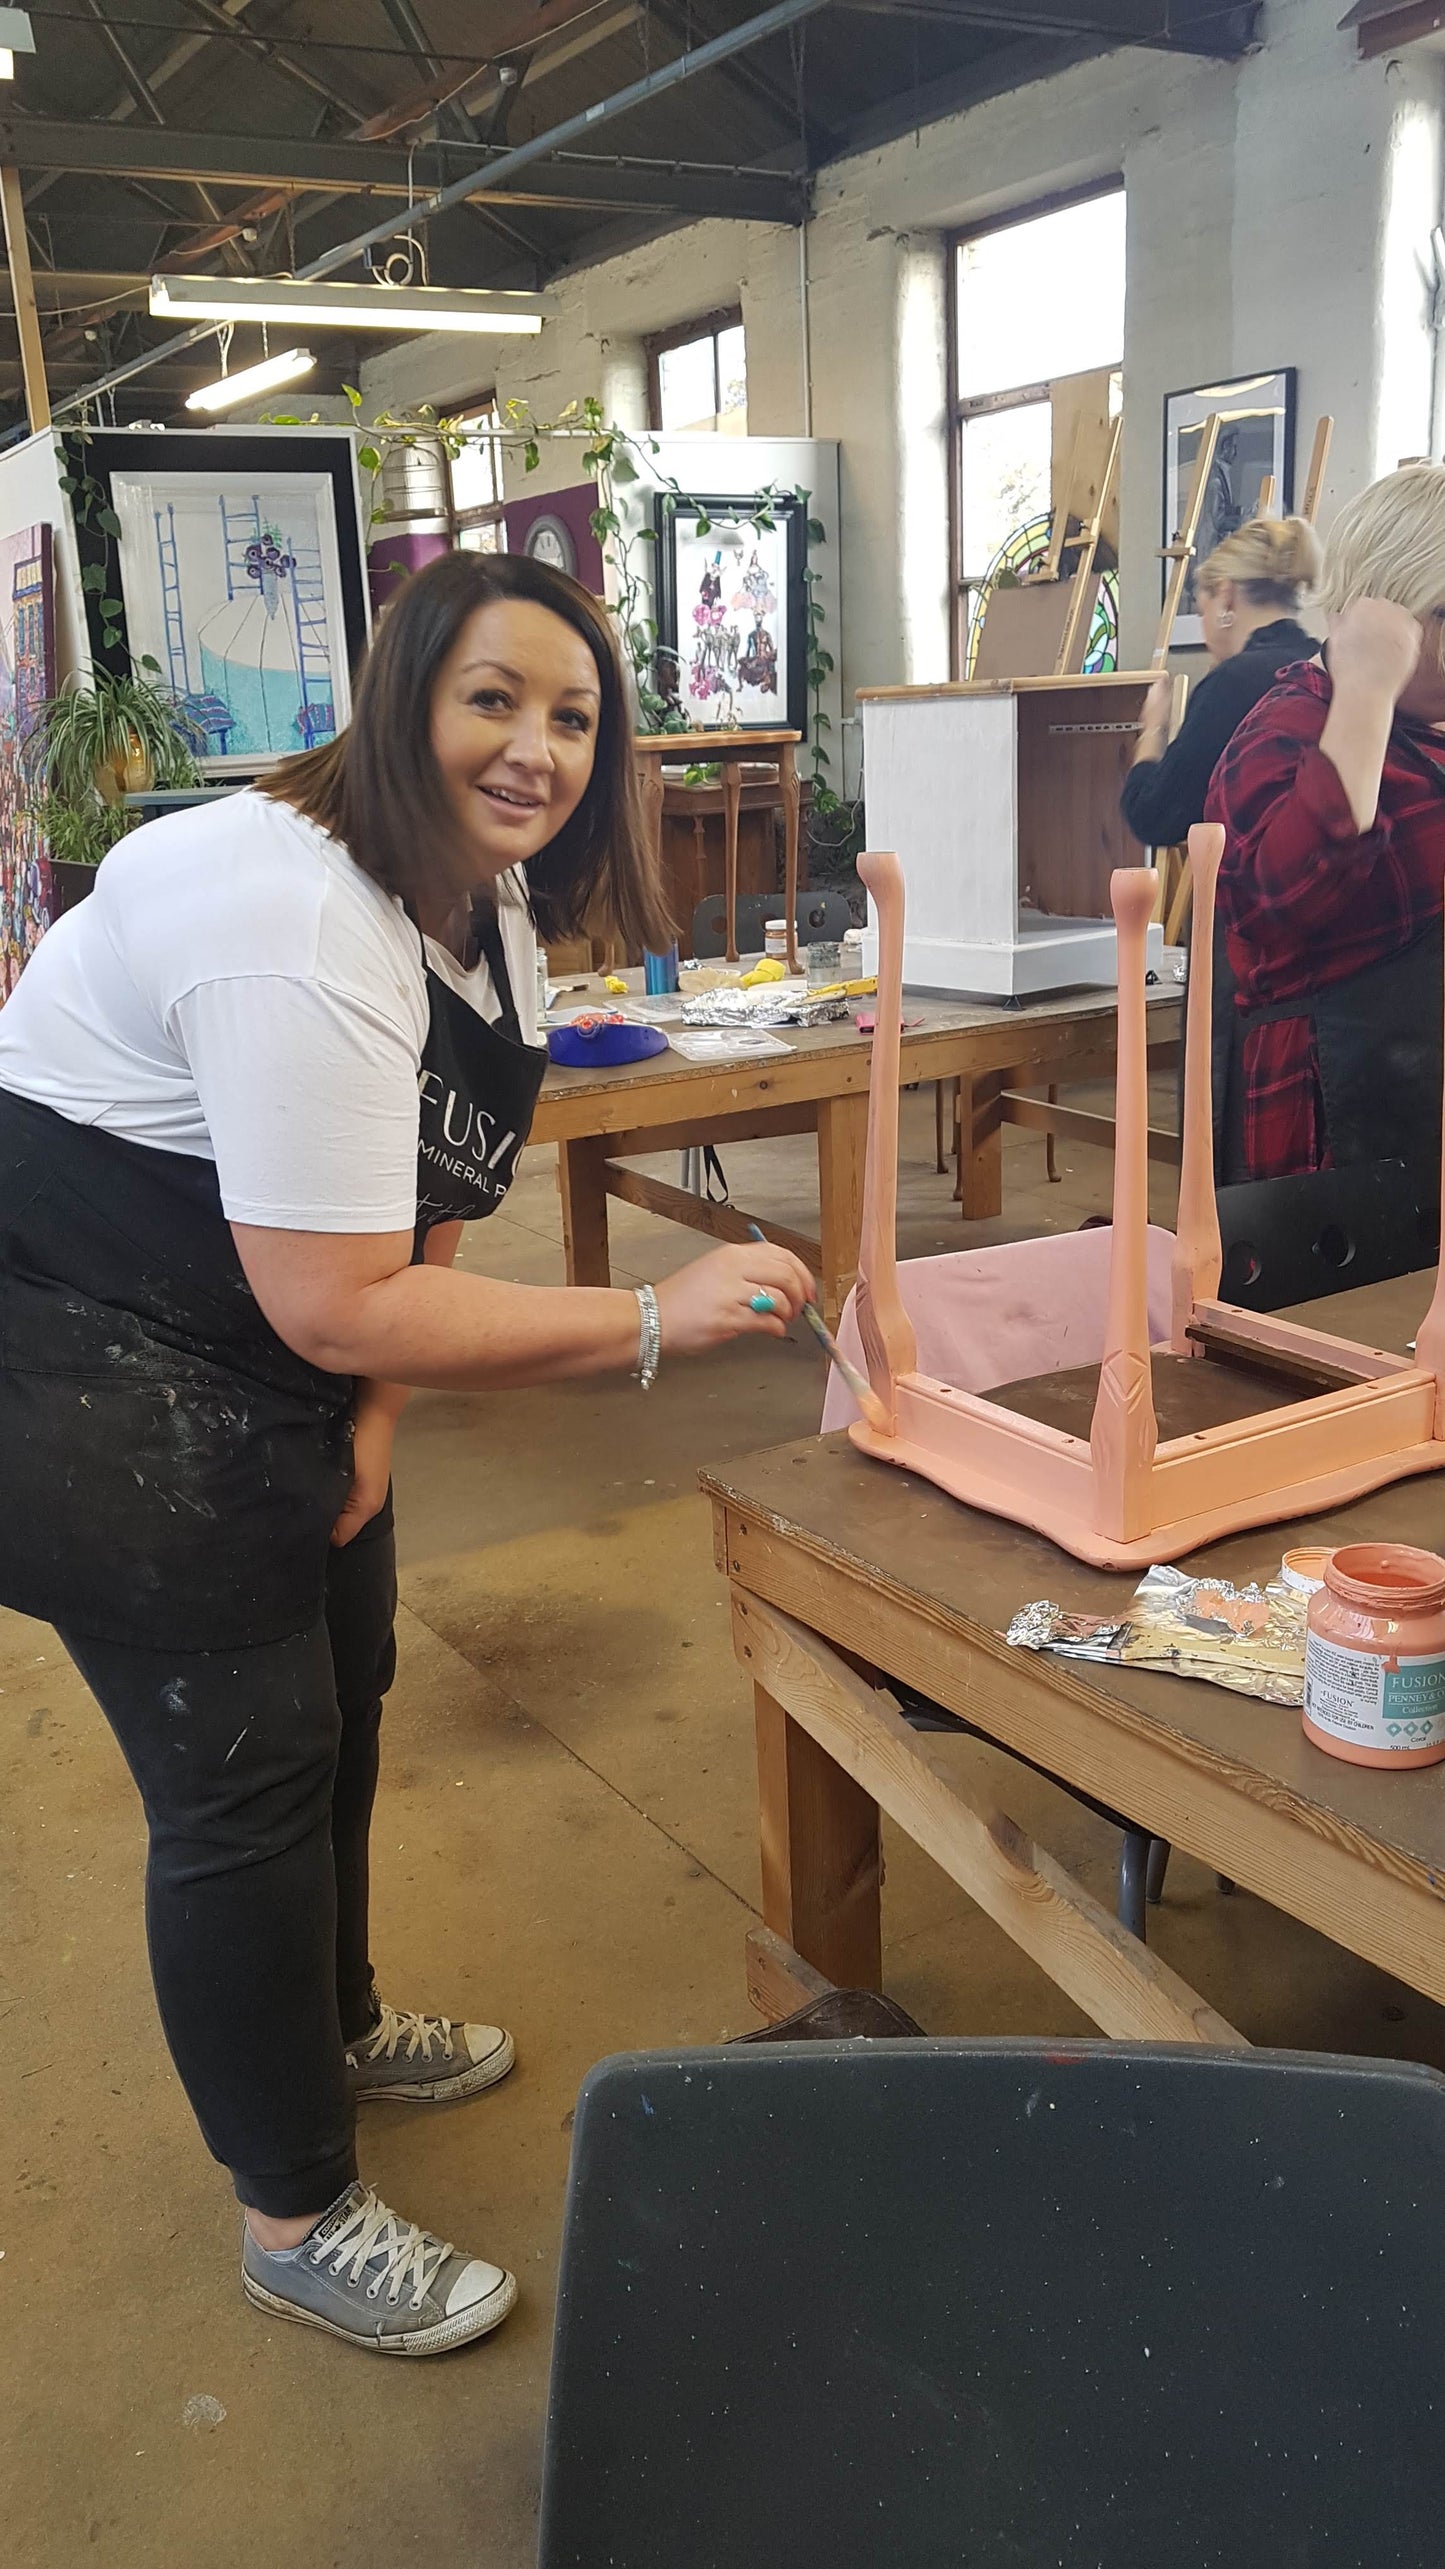 ONE DAY WORKSHOP: Learn Furniture Upcycling & Design - Booking now